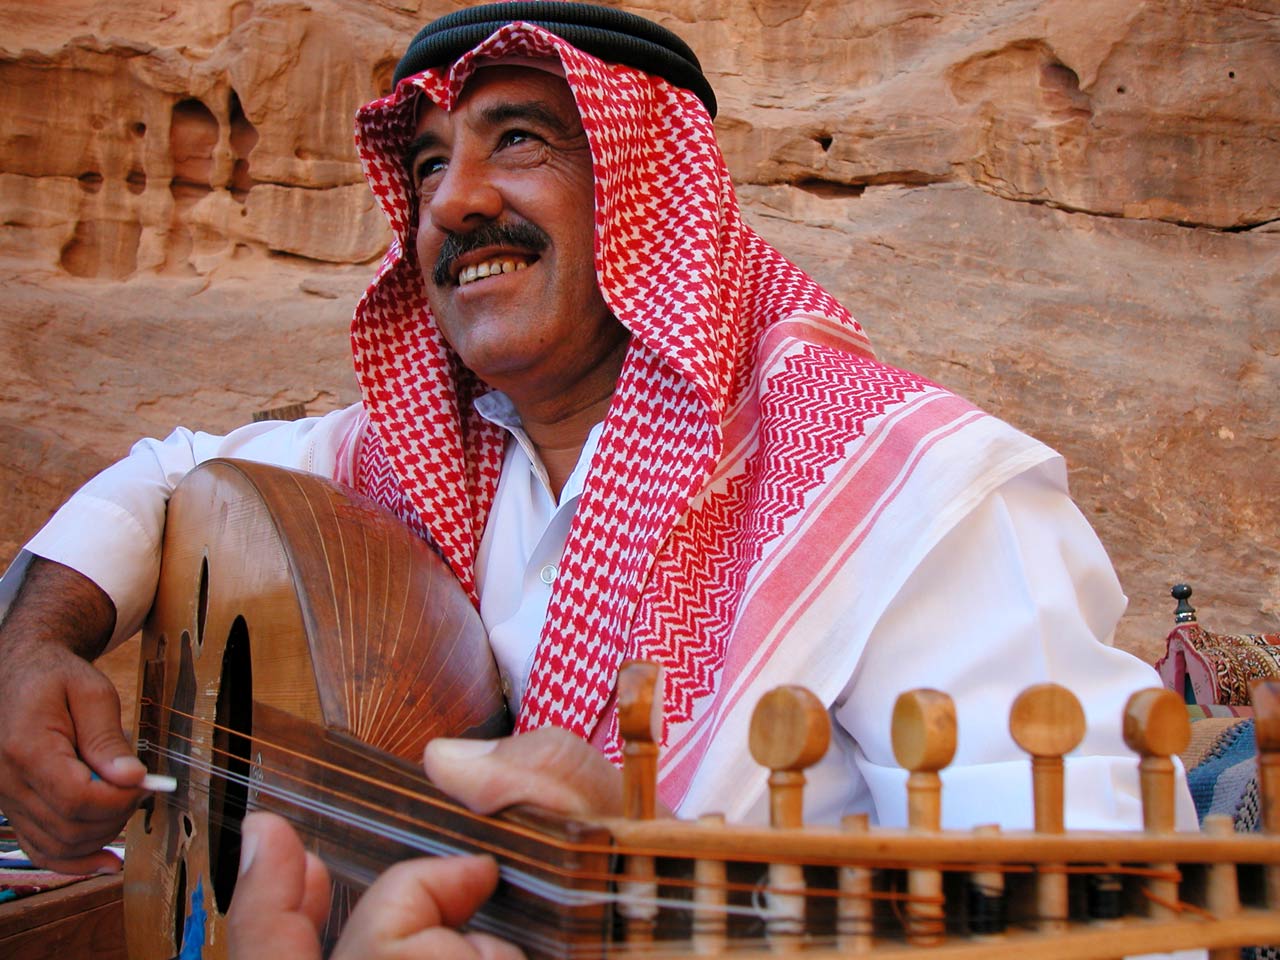 Jordan - musician in traditional clothes